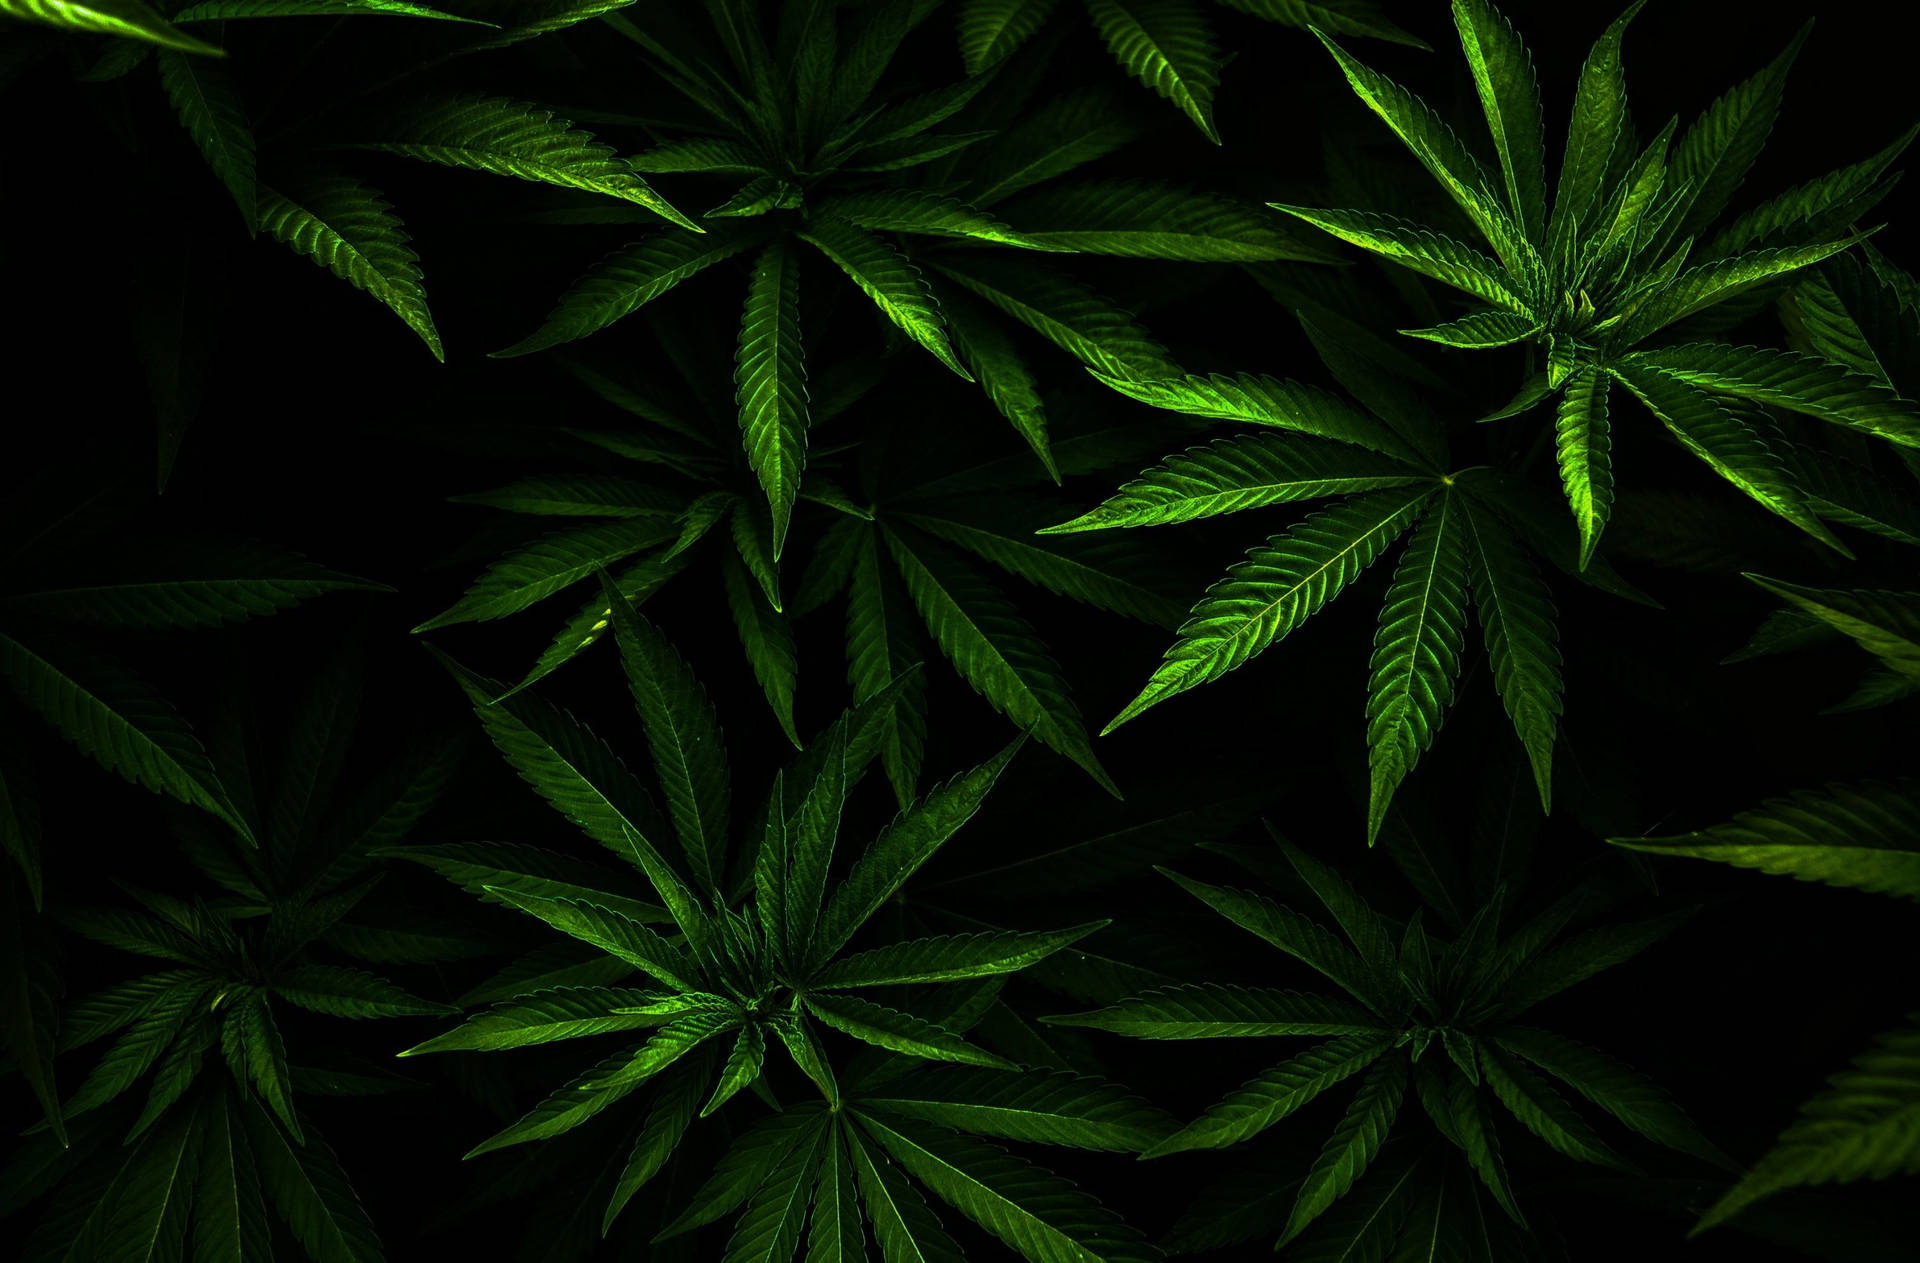 Embrace your inner hippie with some lush stoner vibes. Wallpaper